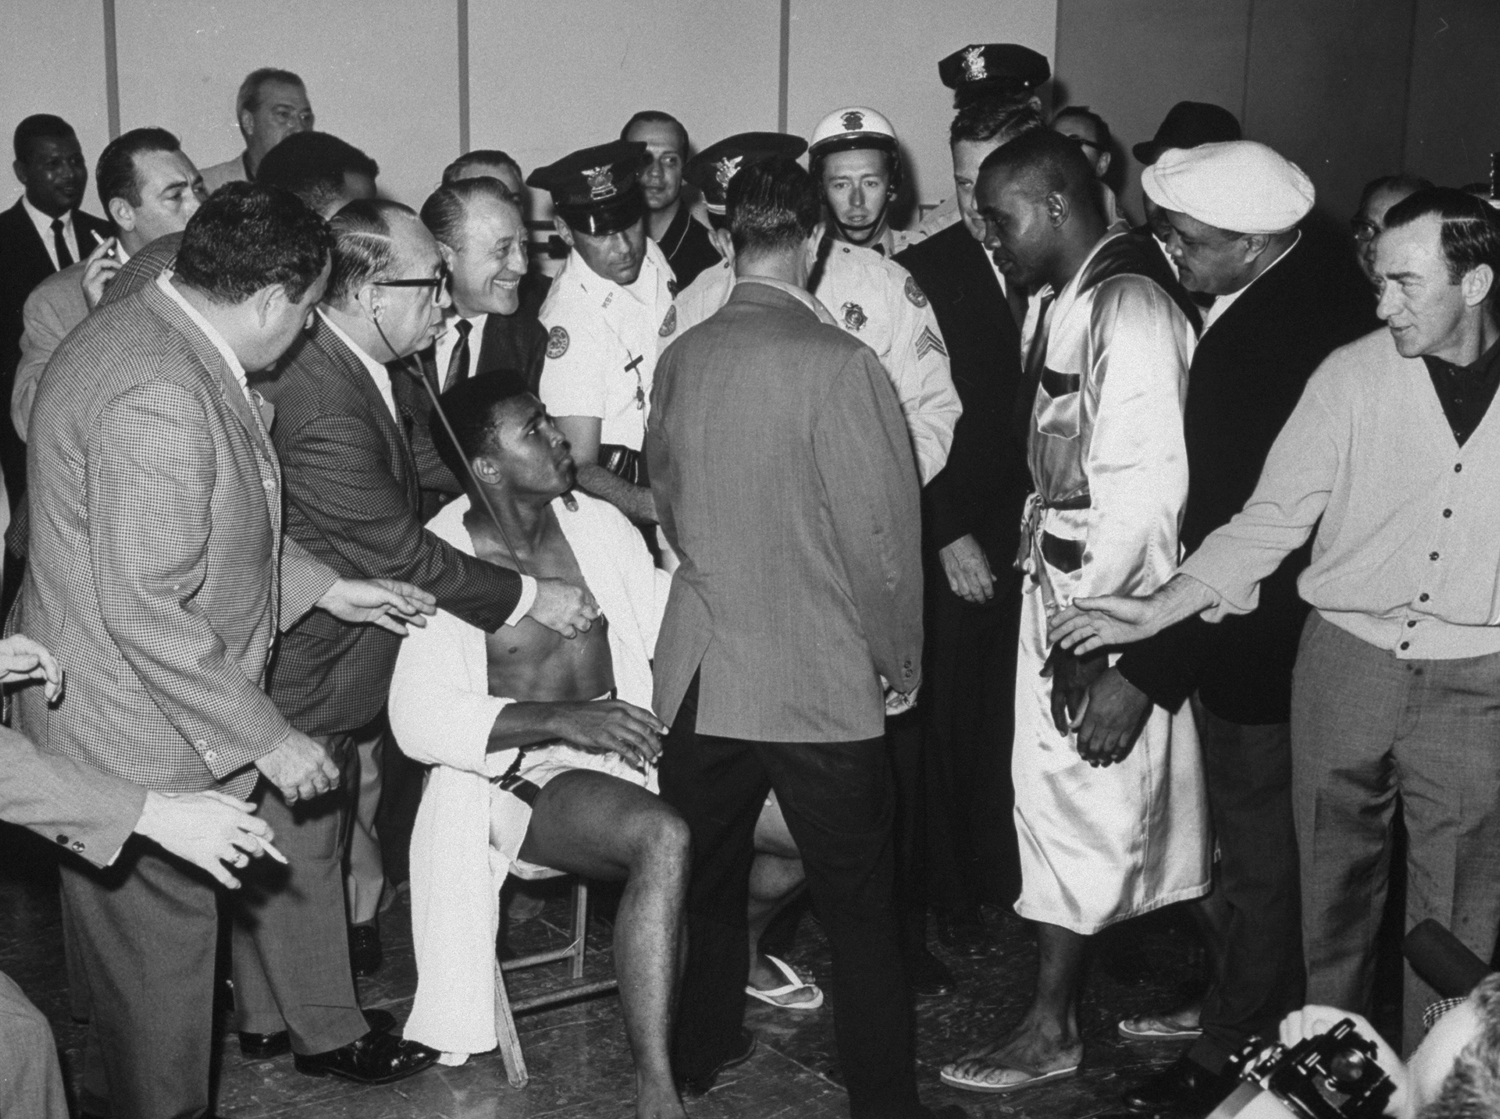 Sonny Liston at the weighting-in ceremonies before his heavyweight championship fight with Cassius Clay (sitting at left).